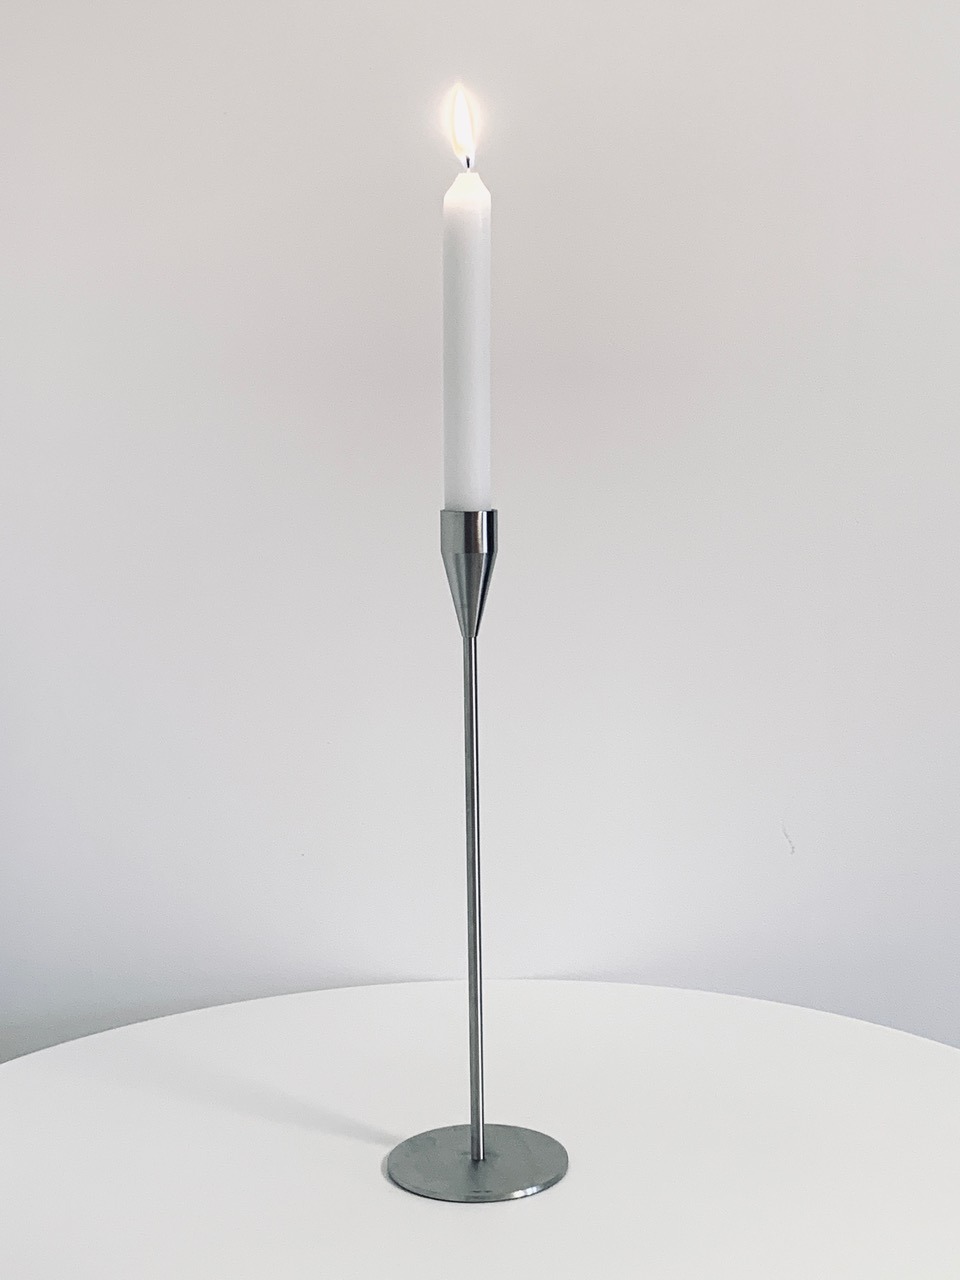 Image of the Piet Hein candlestick Jupiter offered in this advertisement